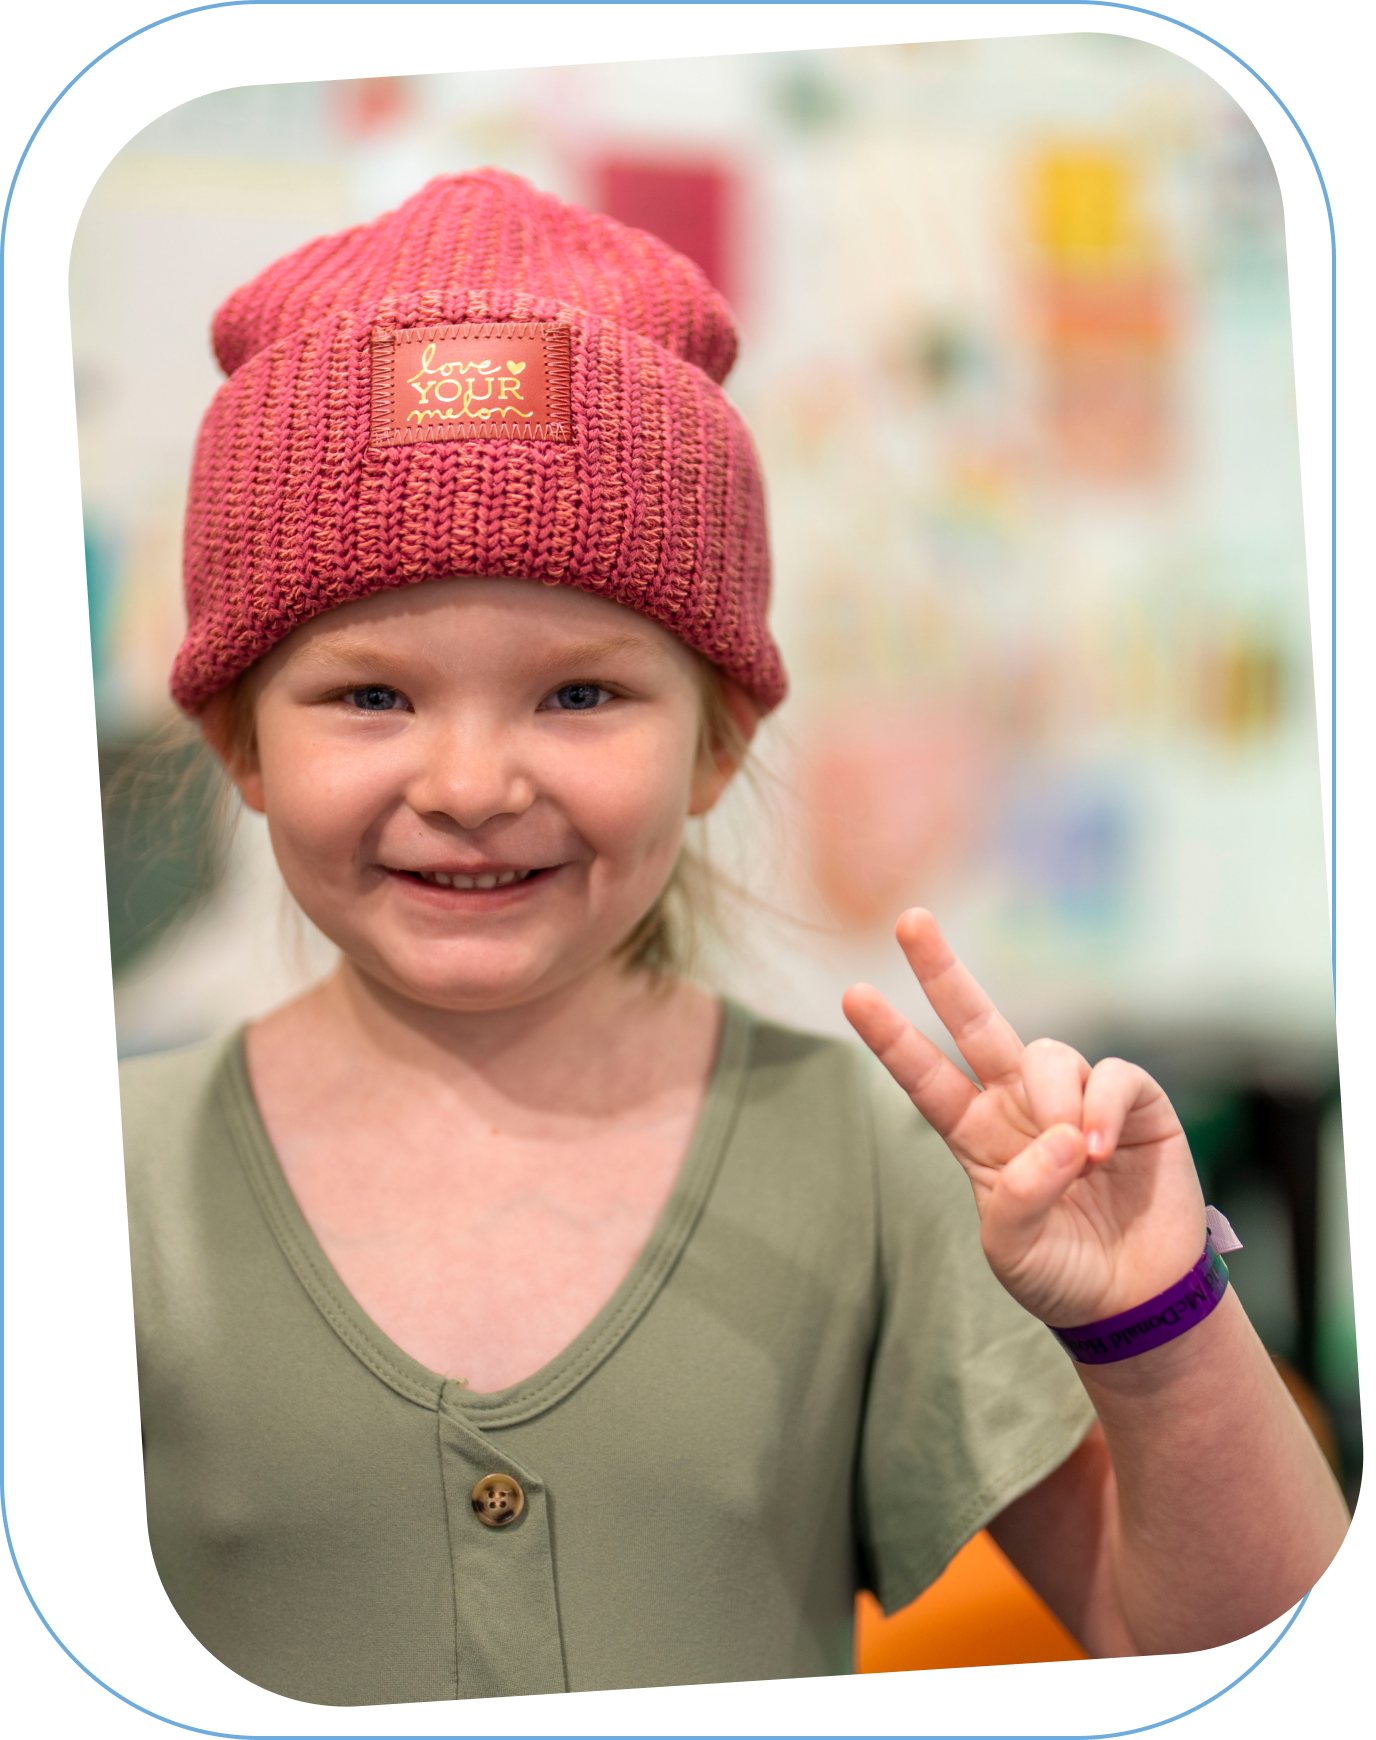 Young girl wearing a pink Love Your Melon beanie smiling while holding up a peace sign